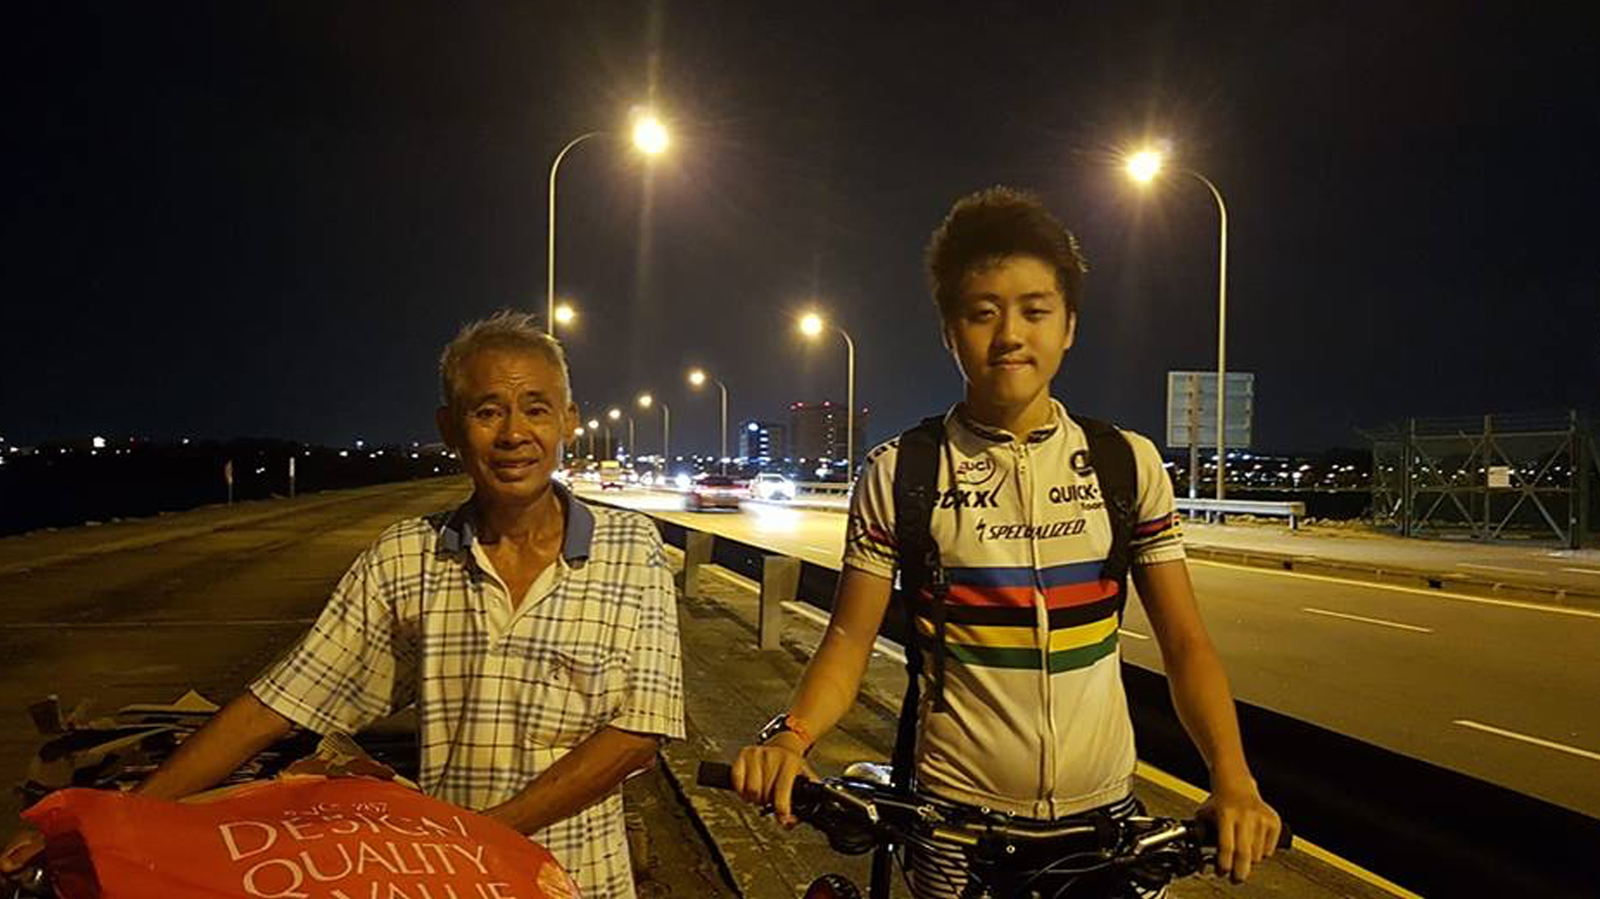 Lost karung guni uncle helped by cyclists who walk him home from Yishun Dam